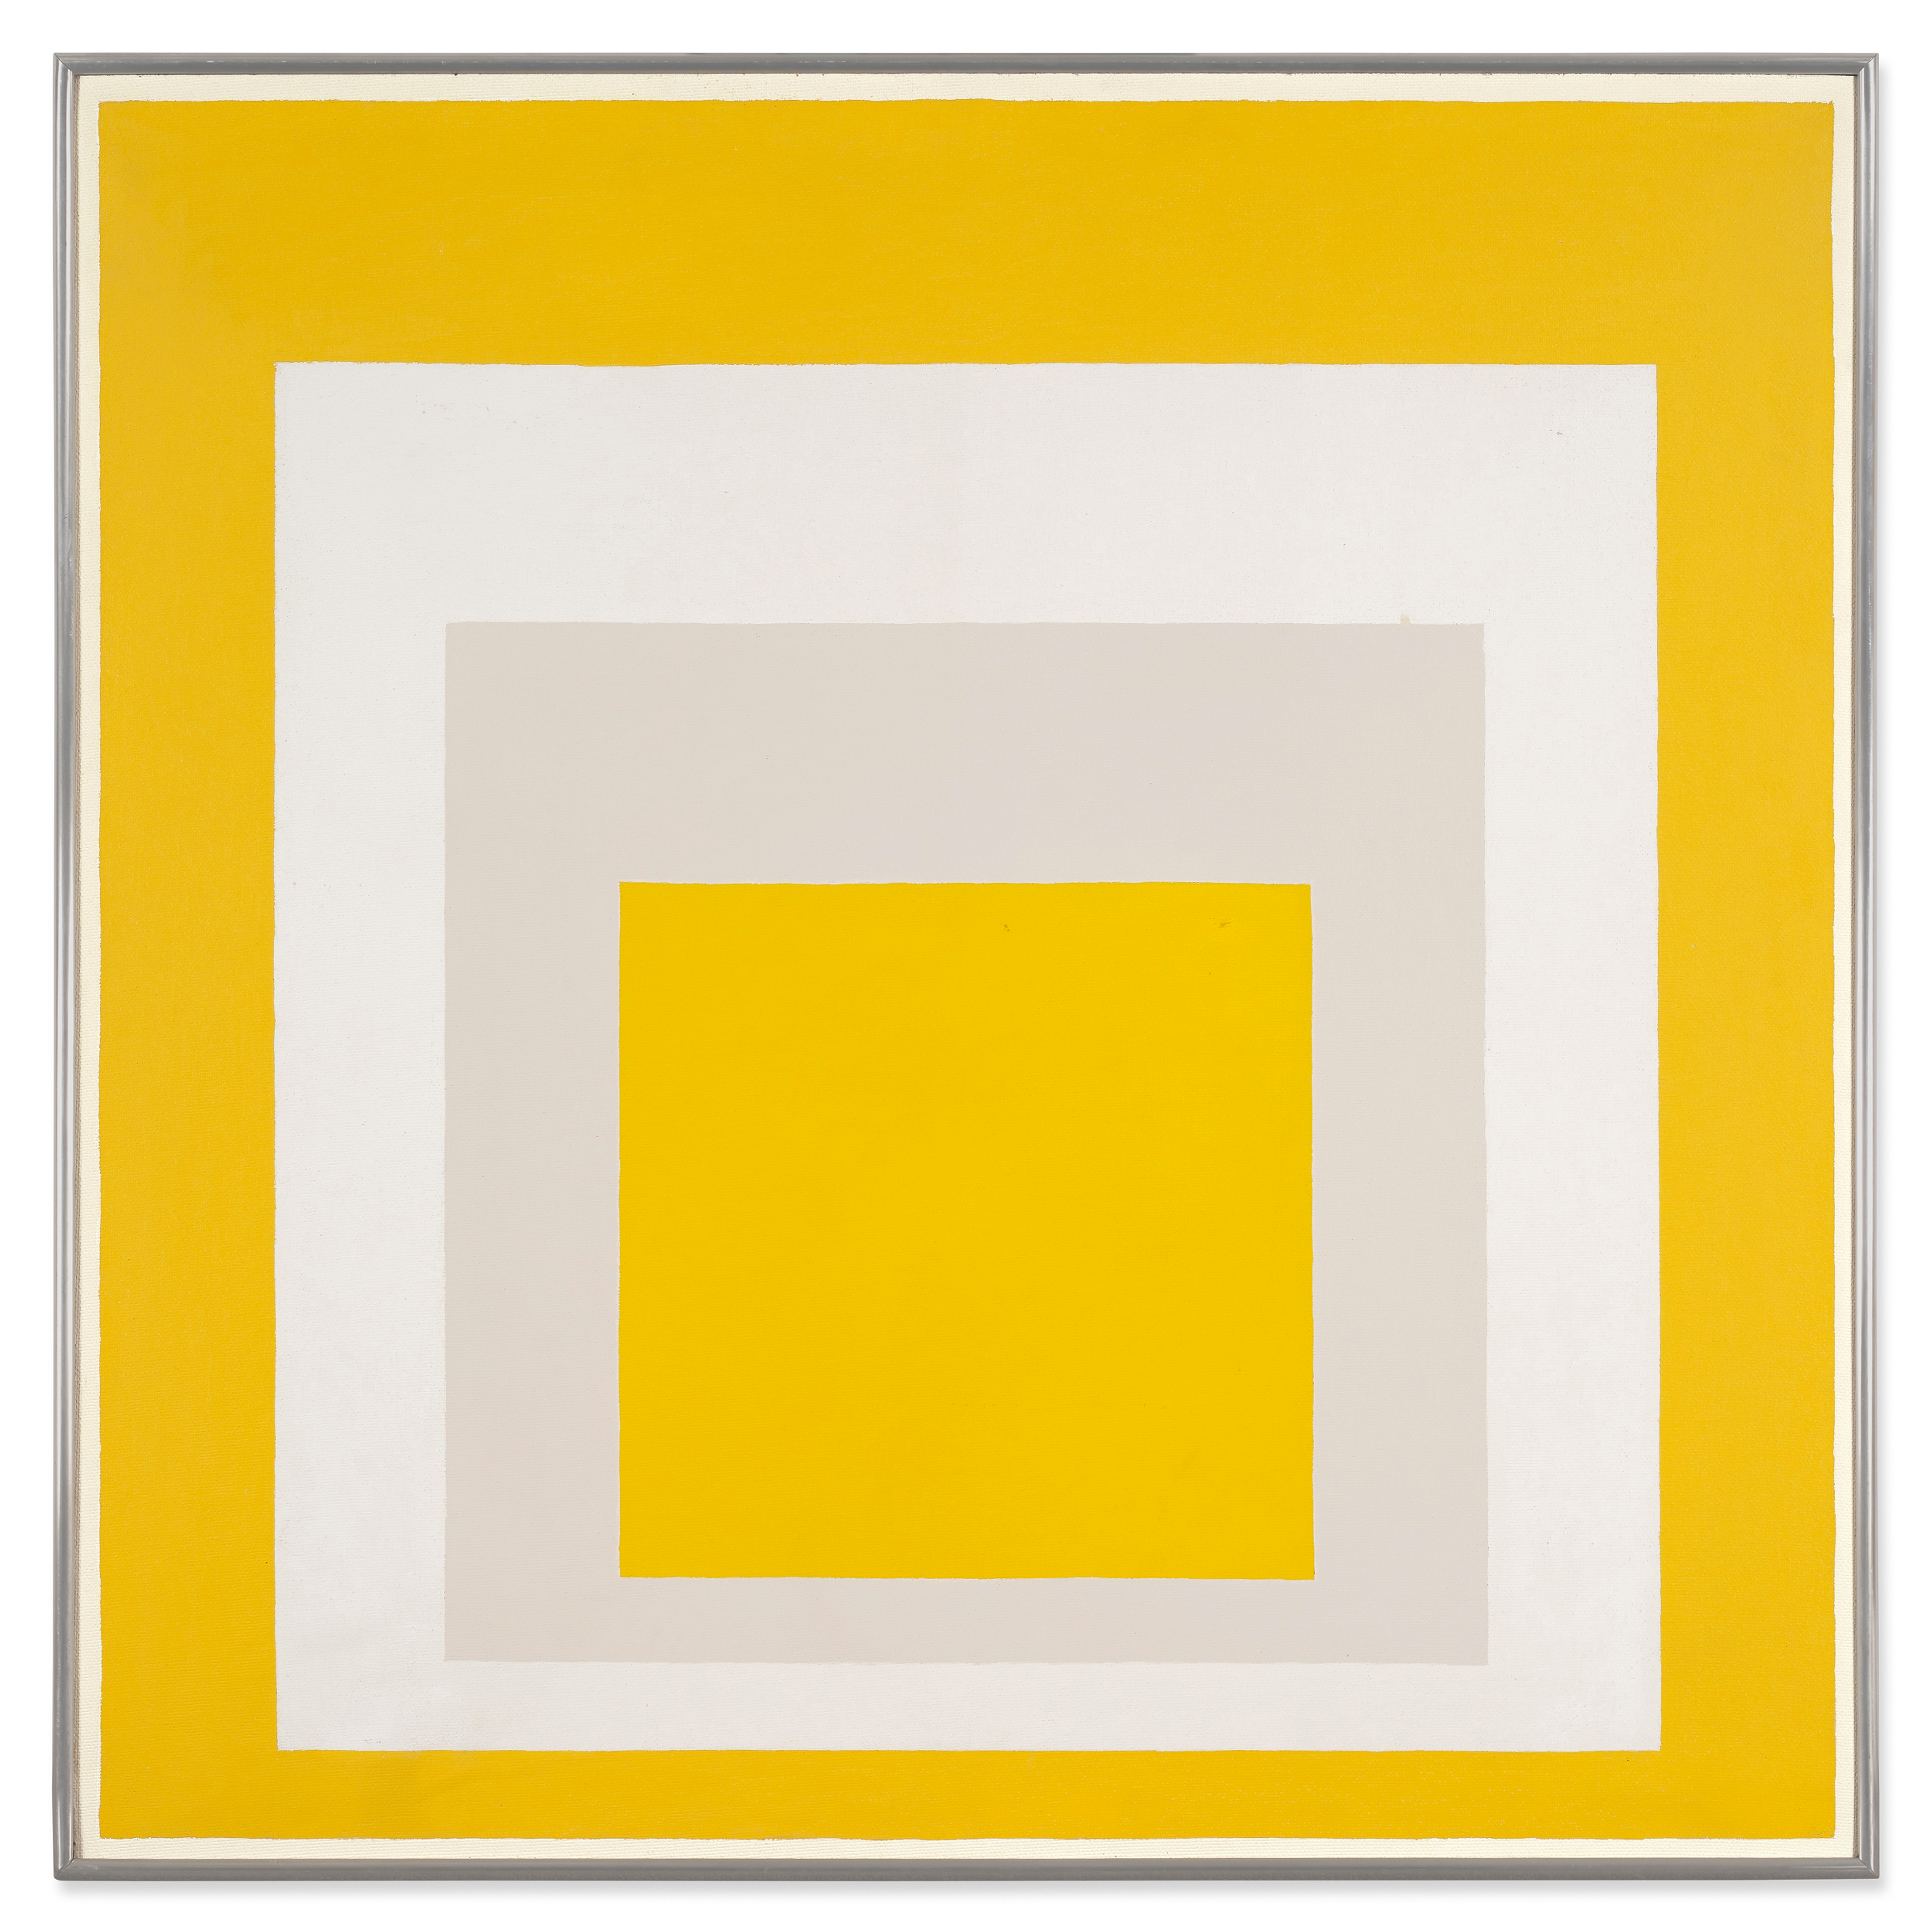 A series of yellow, grey and white squares get increasingly smaller from the centre of the composition.